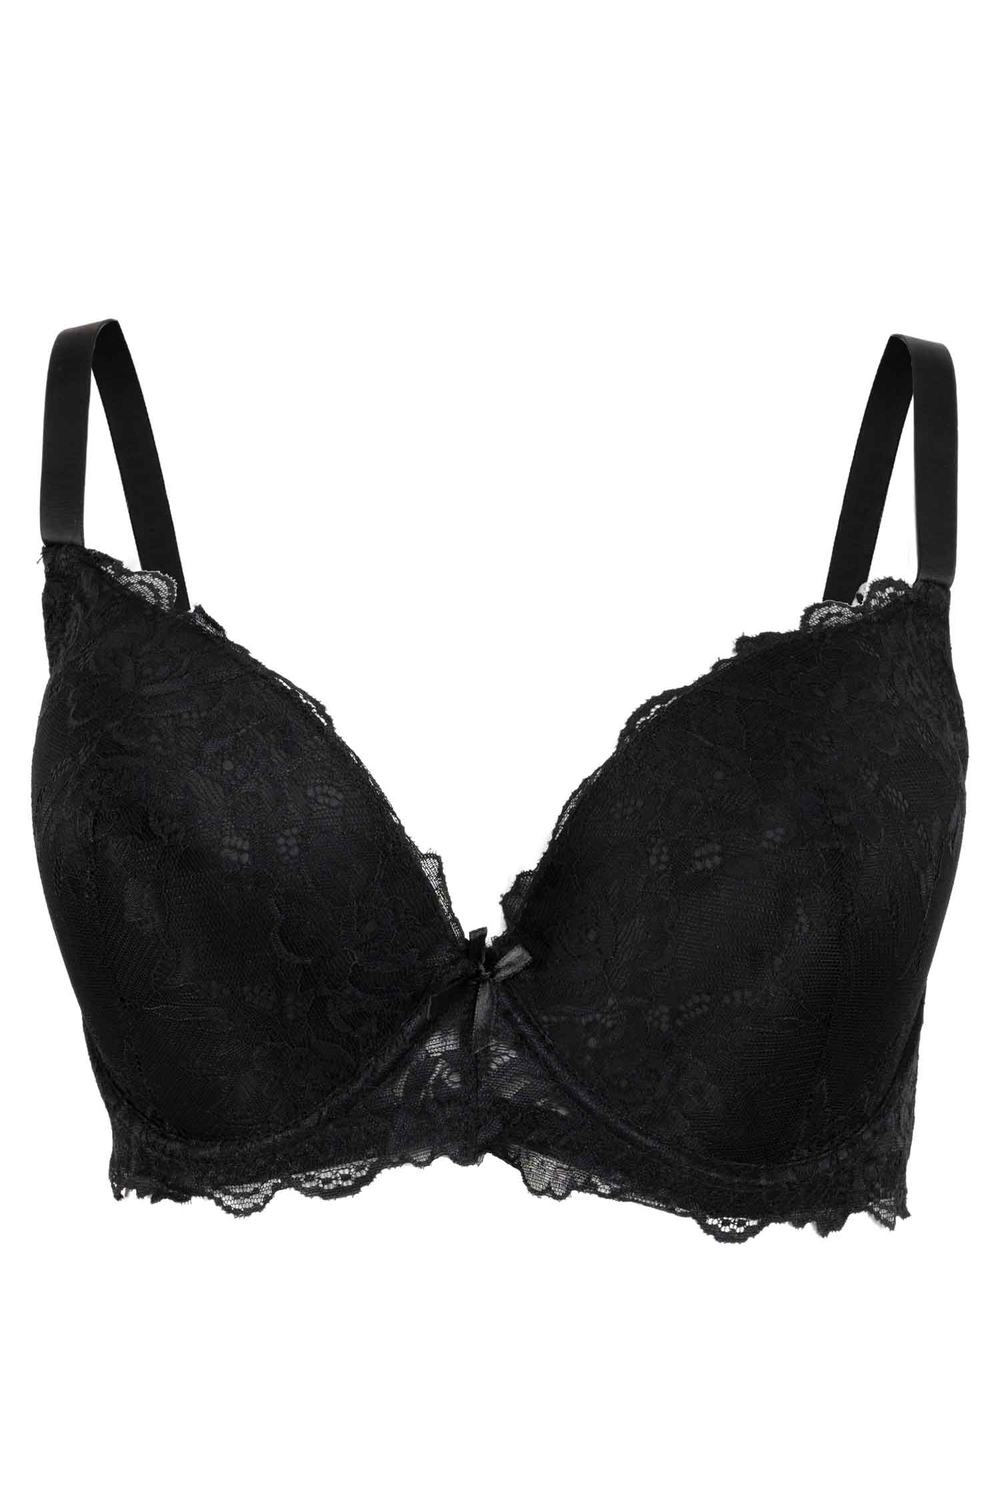 https://www.rossy.ca/media/A2W/products/all-over-lace-push-up-bra-black-plus-size-plus-size-plus-size-plus-size-plus-size-plus-size-plus-size-plus-size-plus-size-plus-size-plus-size-plus-size-plus-size-plus-size-plus-size-plus-size-plus-size-plus-size-plu-73857-3.jpg